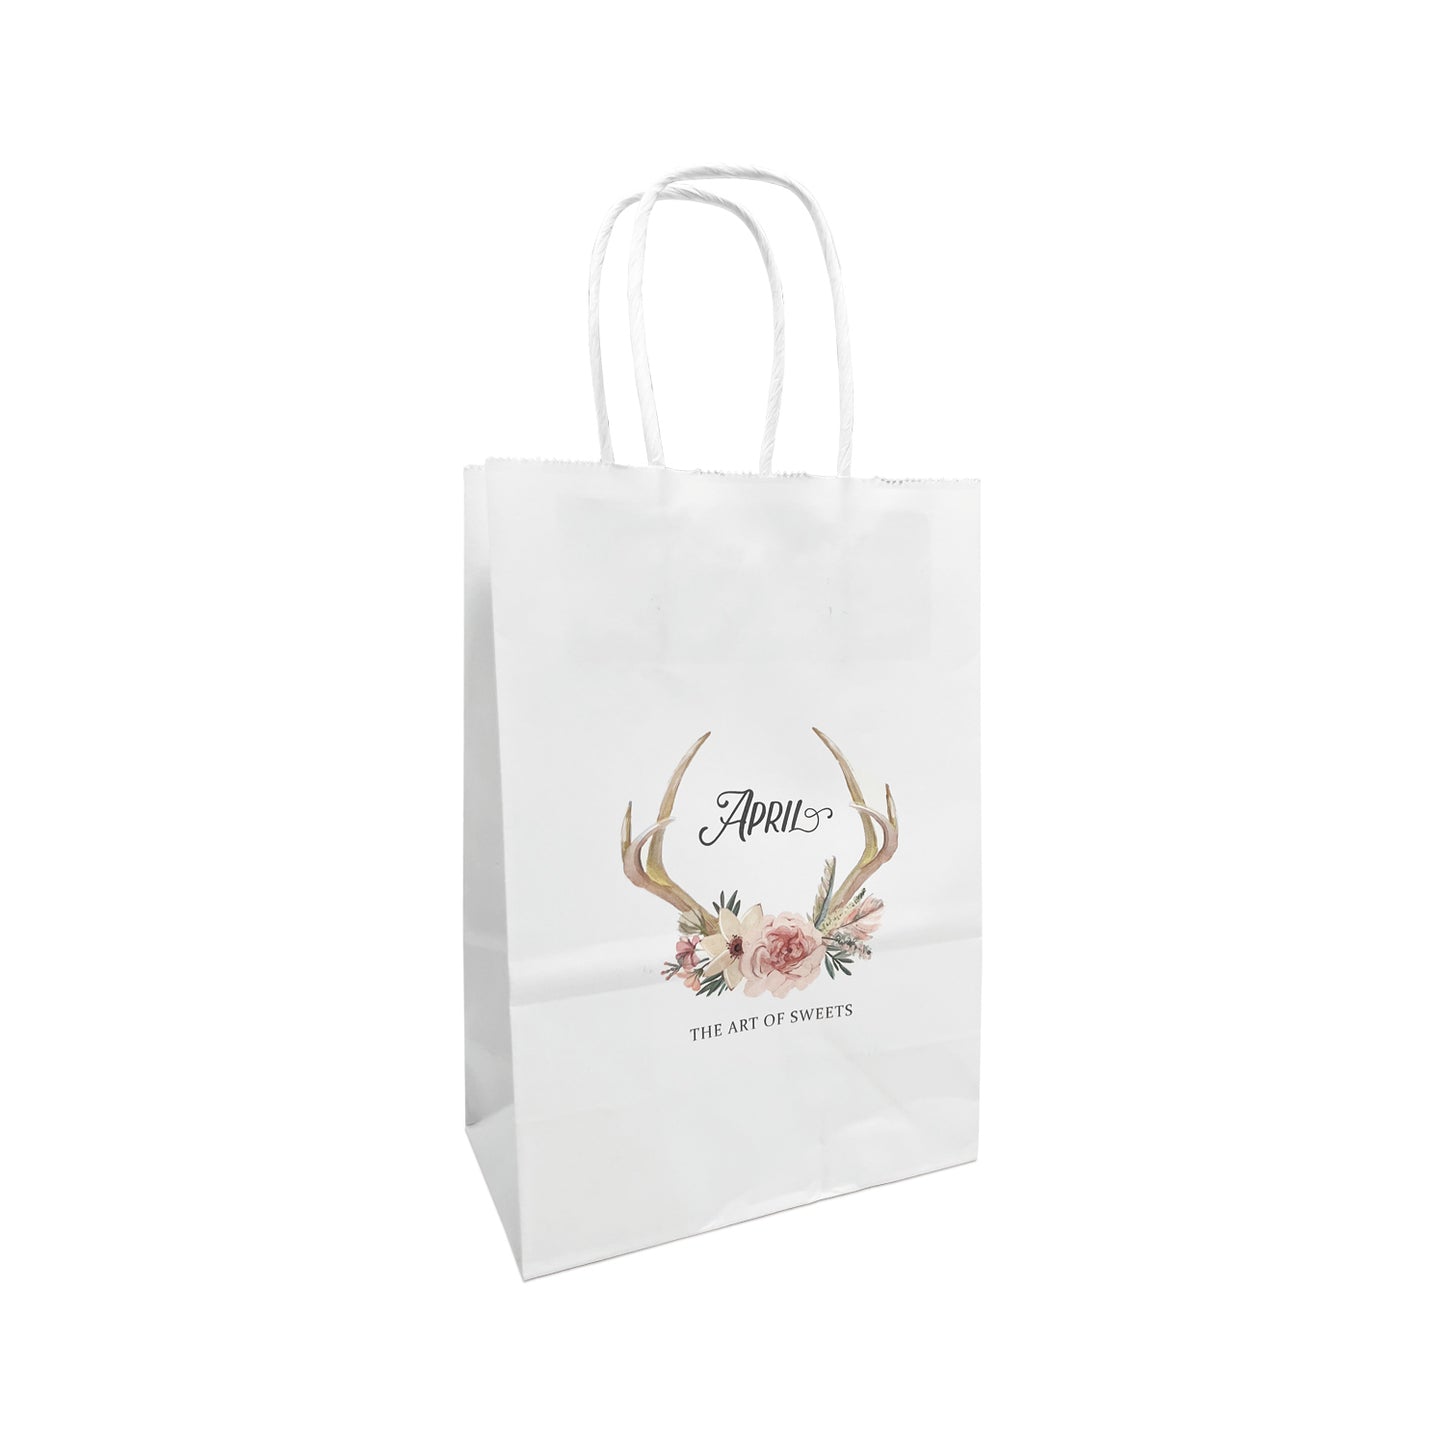 250 Pcs, Gem, 5.3x3.5x8.5 inches, White Paper Bags, with Twisted Handle, Full Color Custom Print